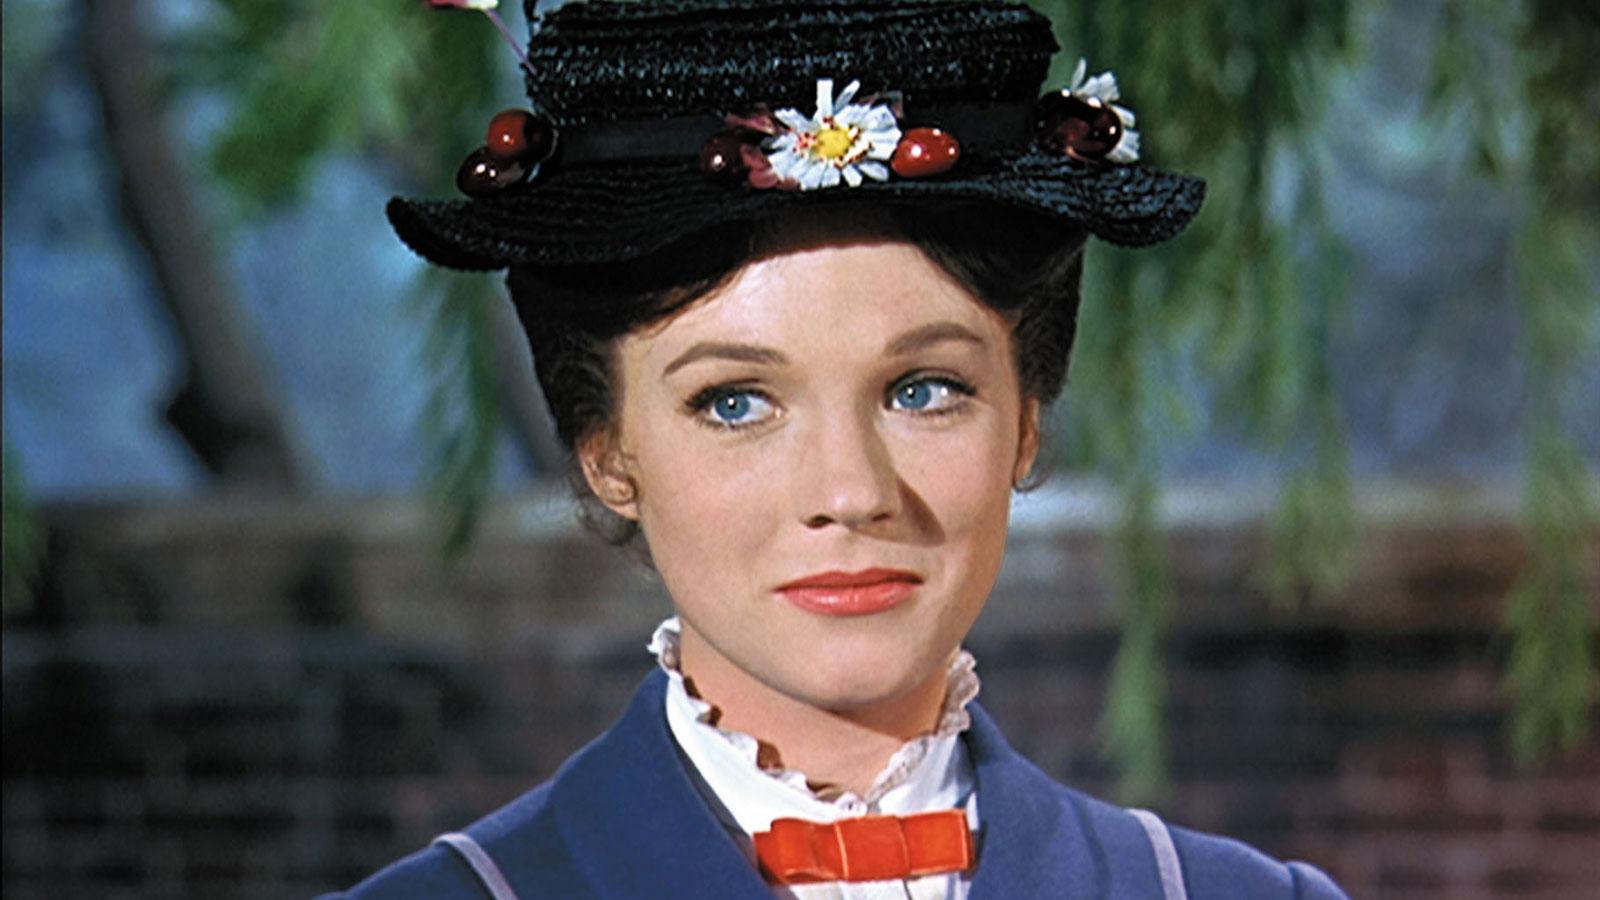 Scene from the film Mary Poppins